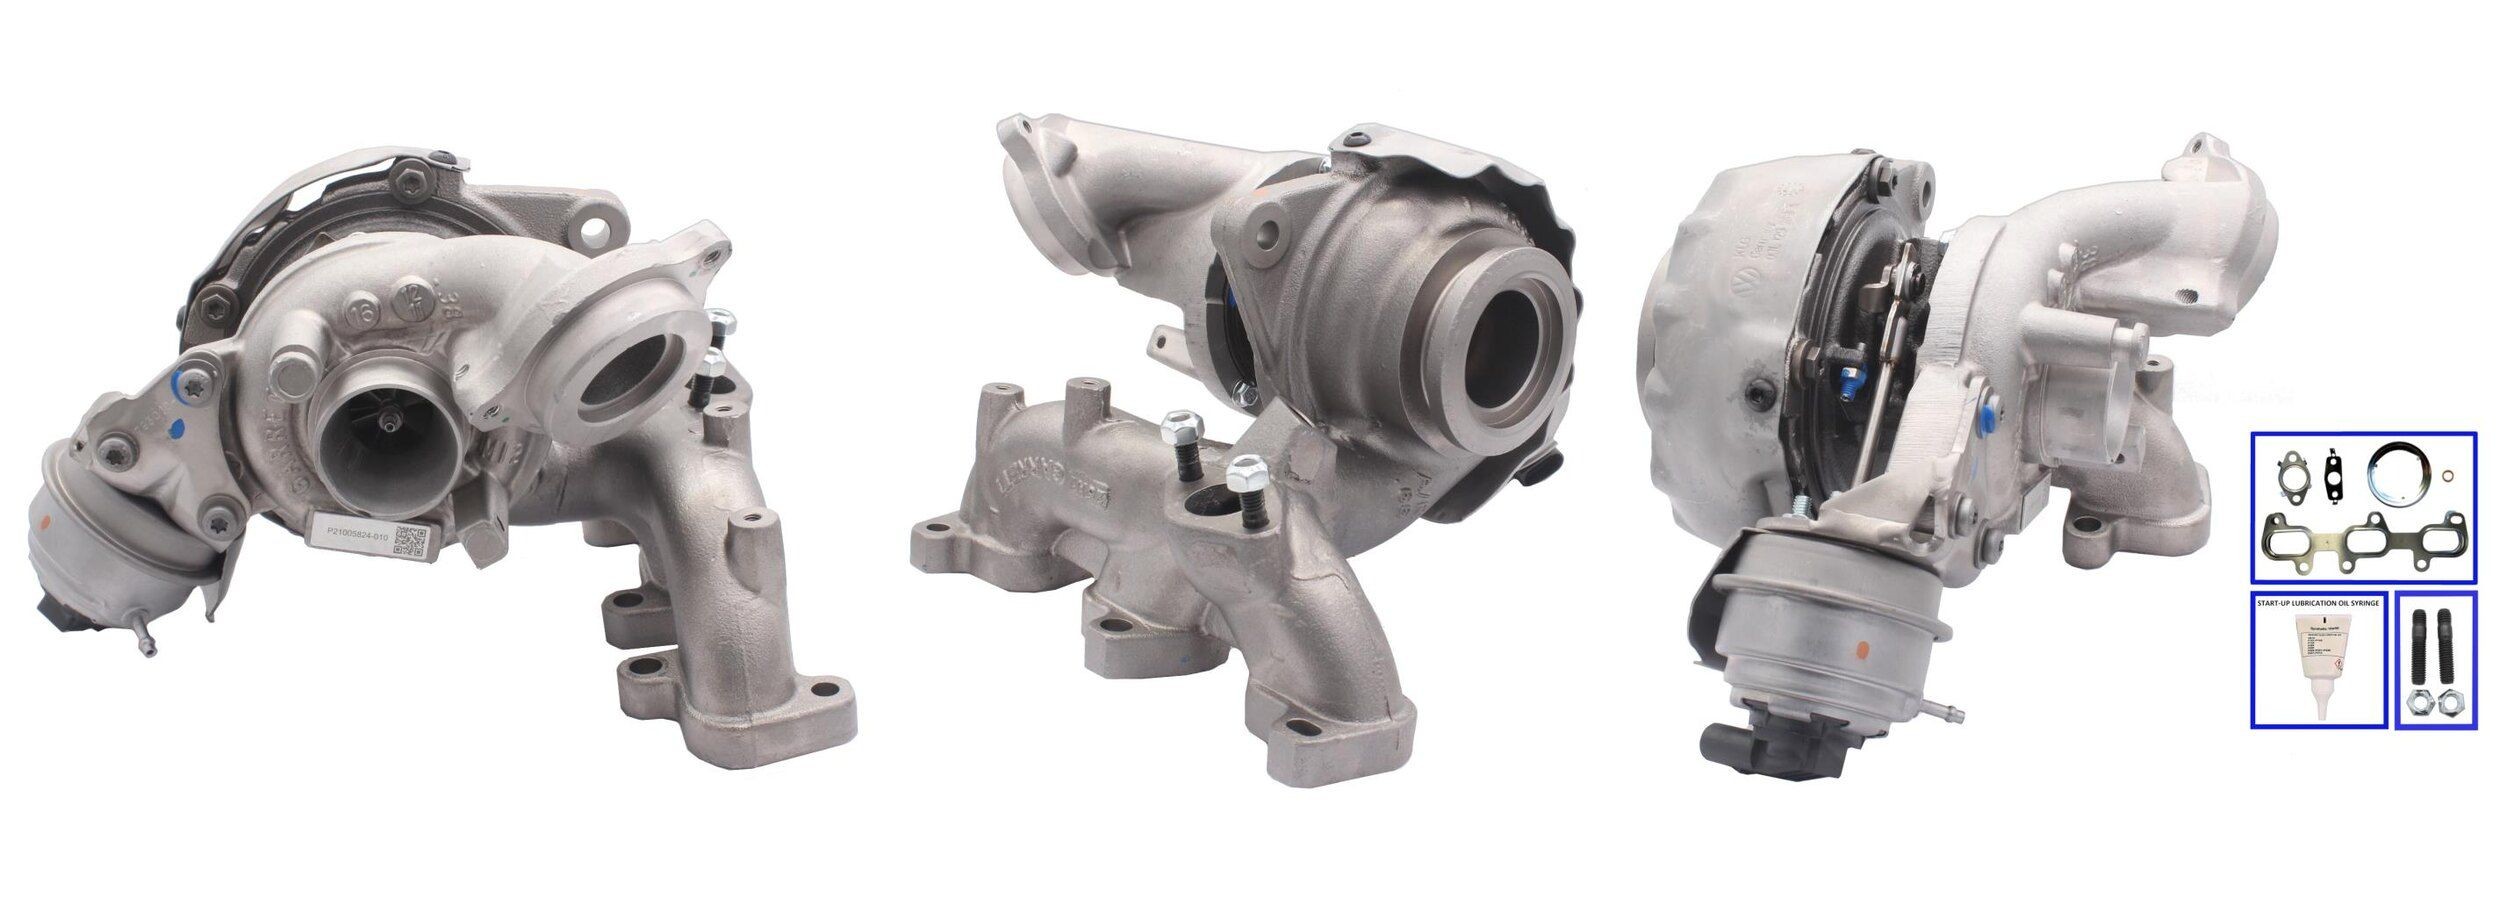 LUCAS LTRPA7890162 Turbocharger Exhaust Turbocharger, with linear position sensor (LPS), with gaskets/seals